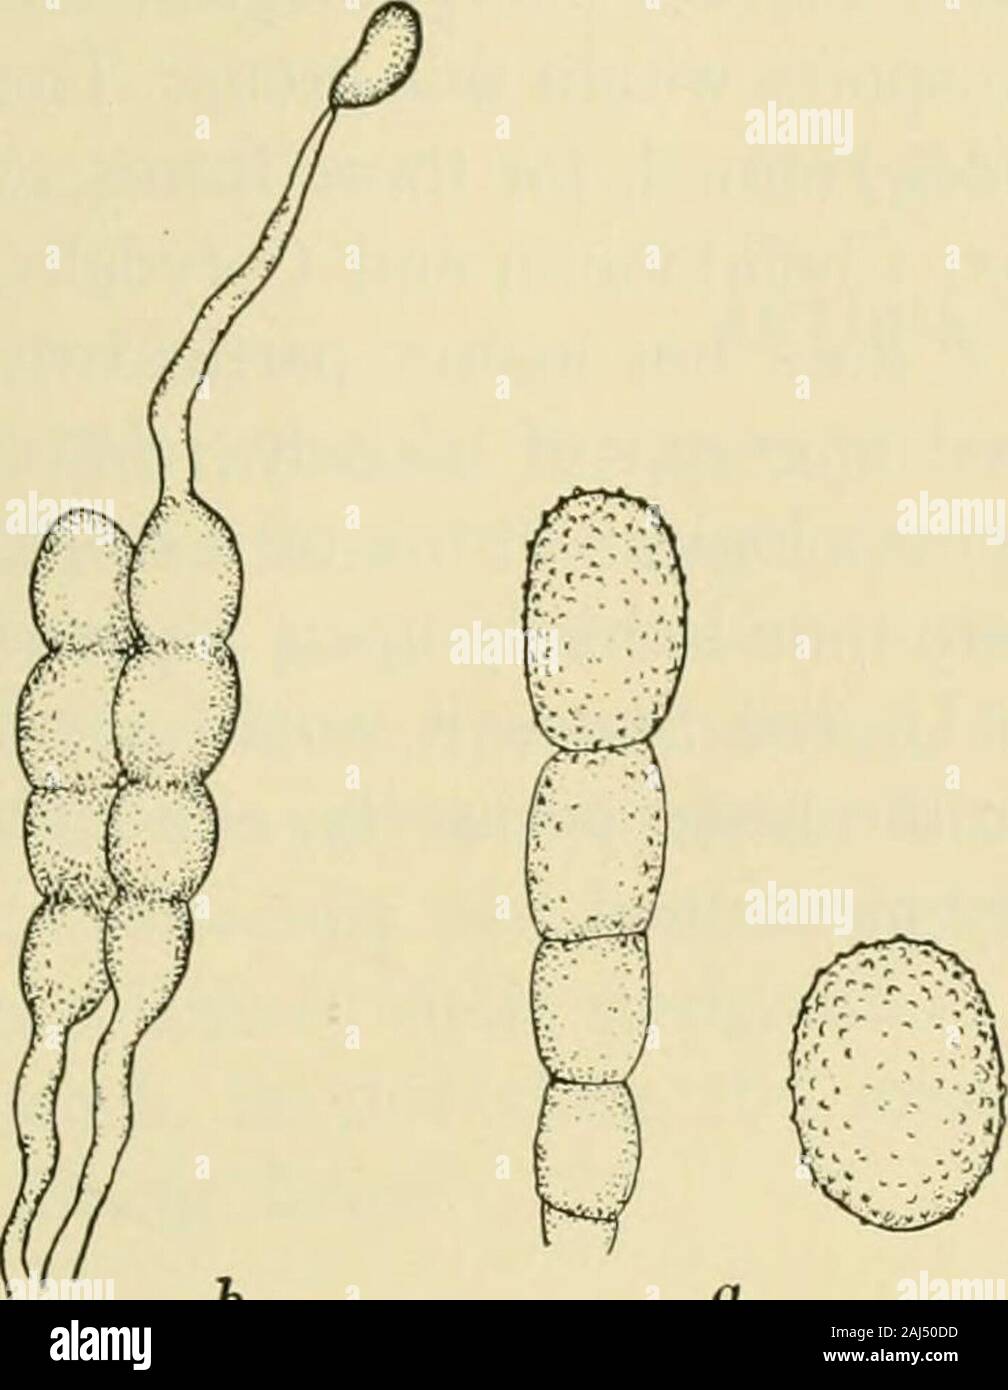 Fungous diseases of plants . Fig. 212. Peridermium on Piine. (After Hartic PROTOBASIDIOMYCETES 437 tongue-shaped bodies .5-./ mm. high, opening by an irregular rup-ture of the peridium. The spores are, according to Arthur, coarsely verrucose with deciduous tuber-cles, except along one narrowline, where tubercles fail. The uredospores are producedin orange-yellow sori, which soonfade to nearly white. They aregenerally ellipsoidal, measuring27-30 X 17-22/x. The teleuto-spores are borne in crowdedwaxy masses, and are at maturitya chain of four basidial cells withina somewhat gelatinized commonwal Stock Photo